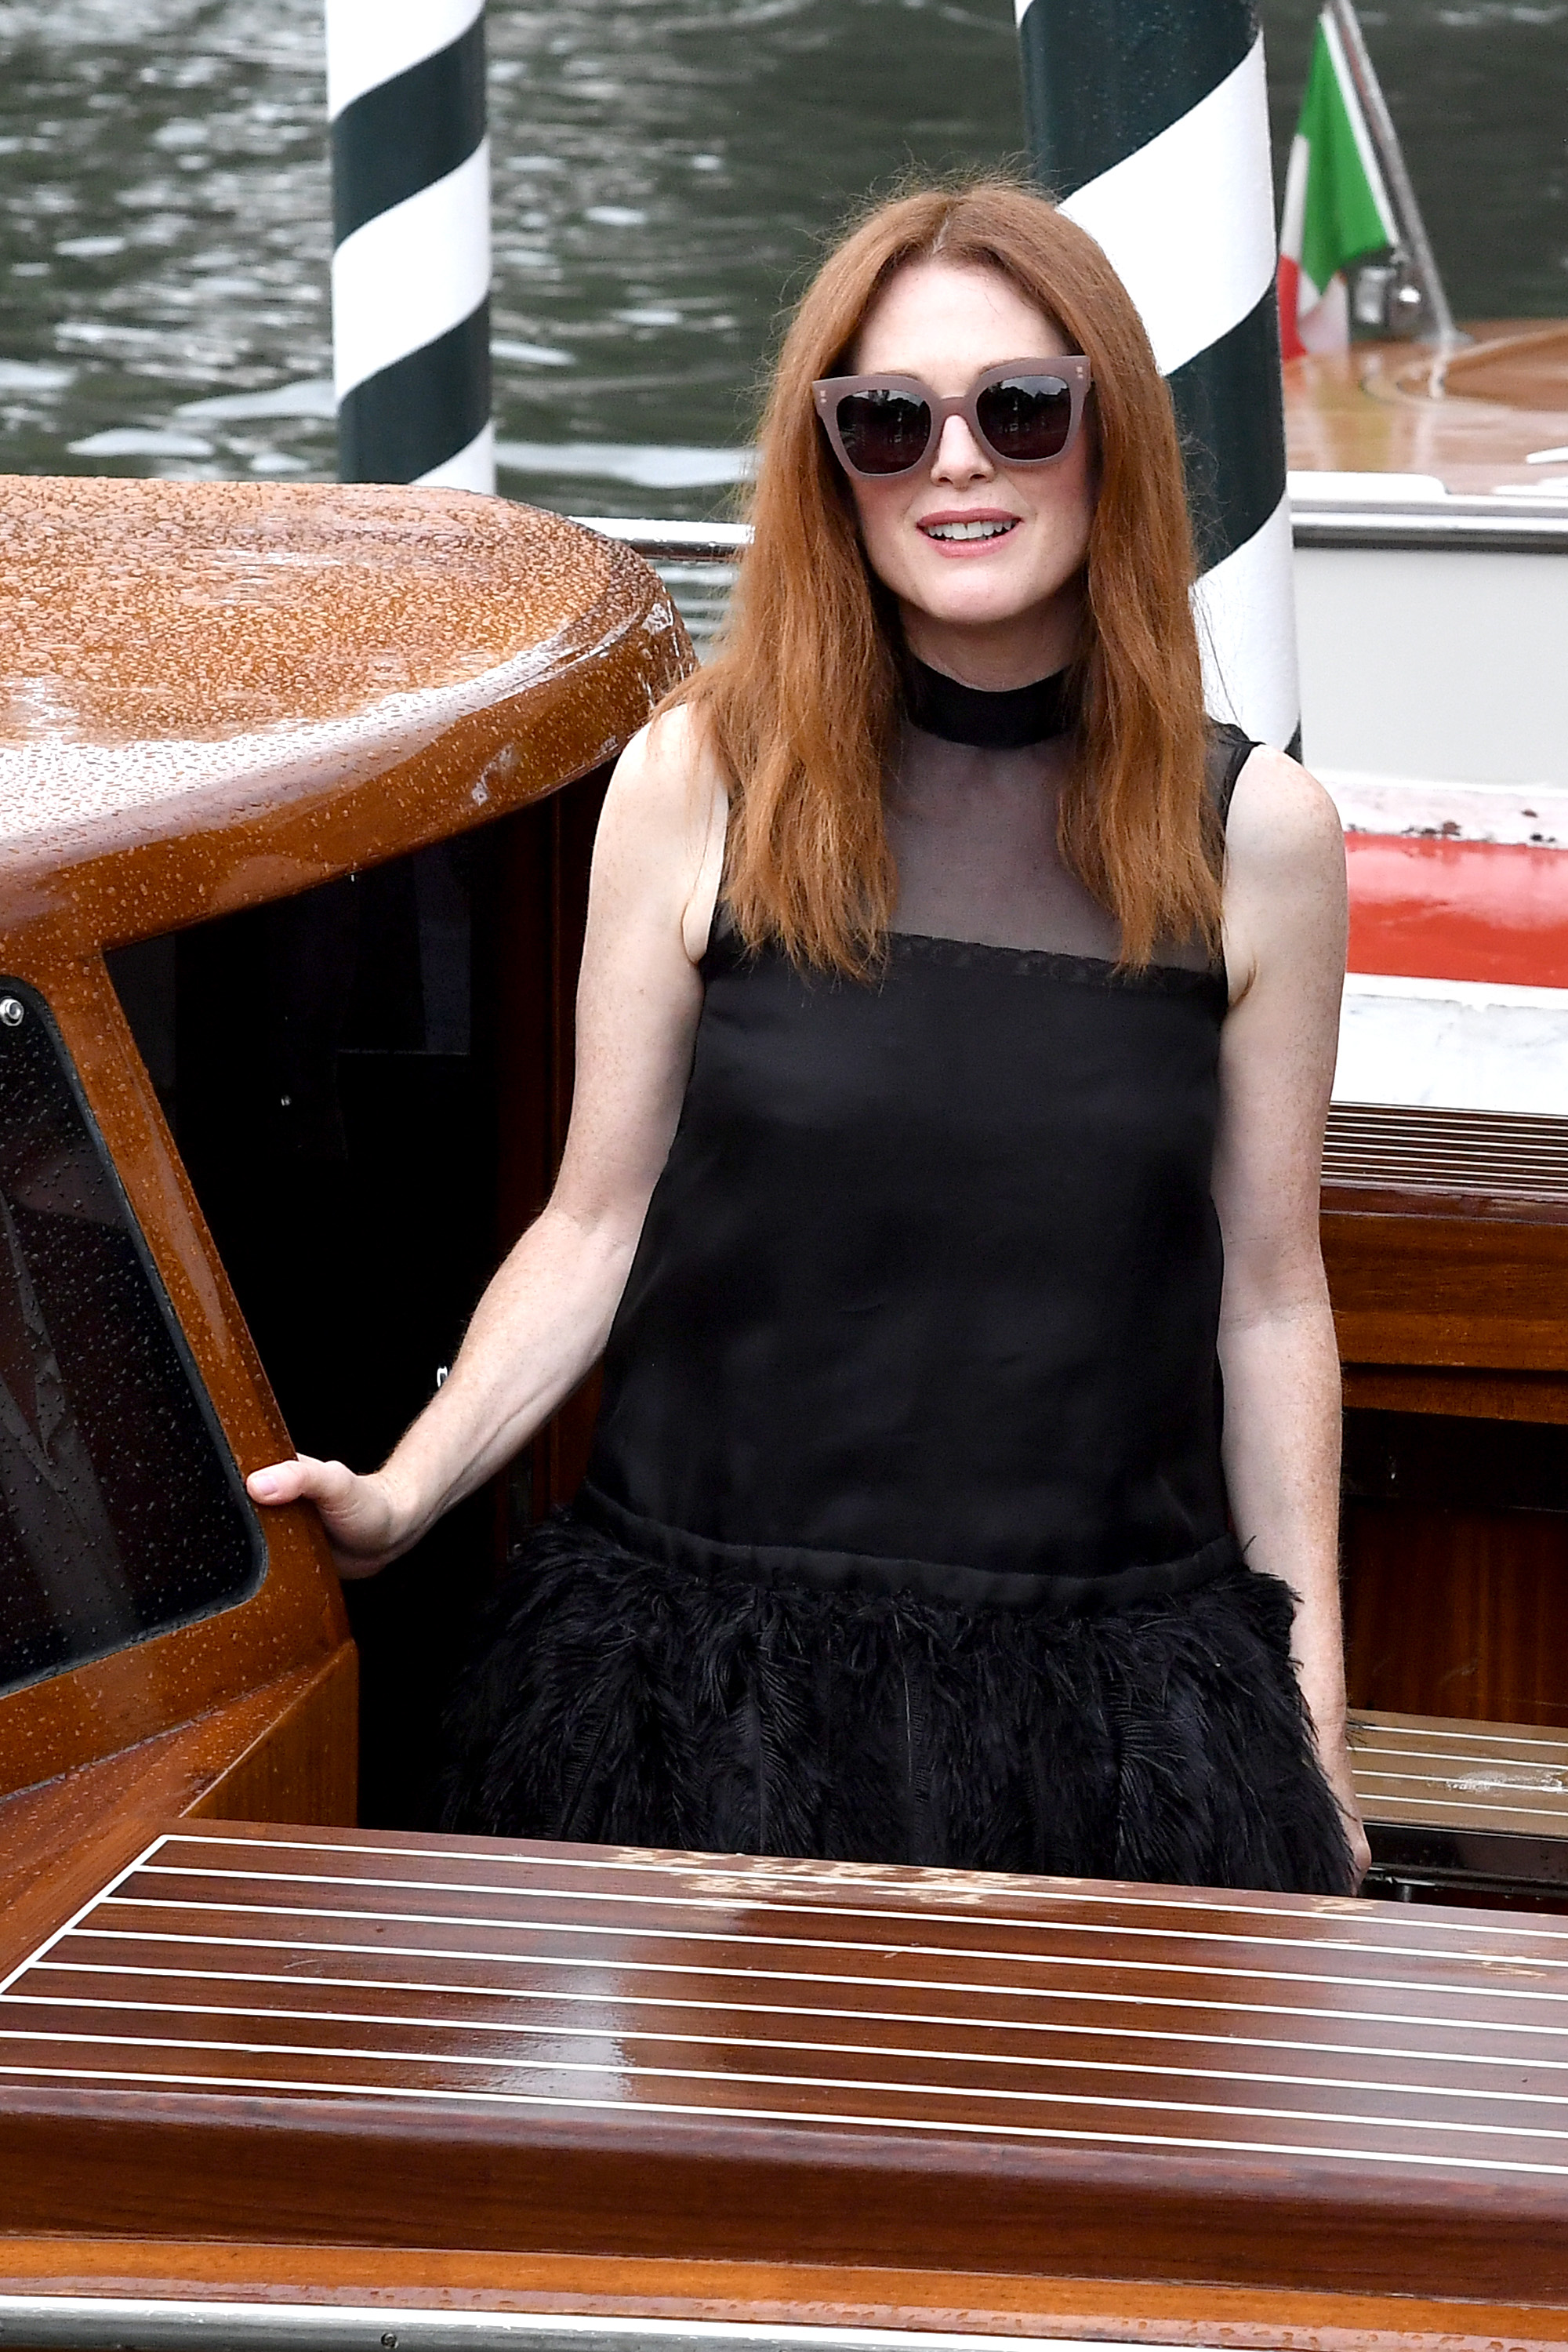 VENICE, ITALY - SEPTEMBER 01: Julianne Moore is seen arriving at Hotel Excelsior during the 74. Venice Film Festival on September 1, 2017 in Venice, Italy. (Photo by Jacopo Raule/GC Images,)